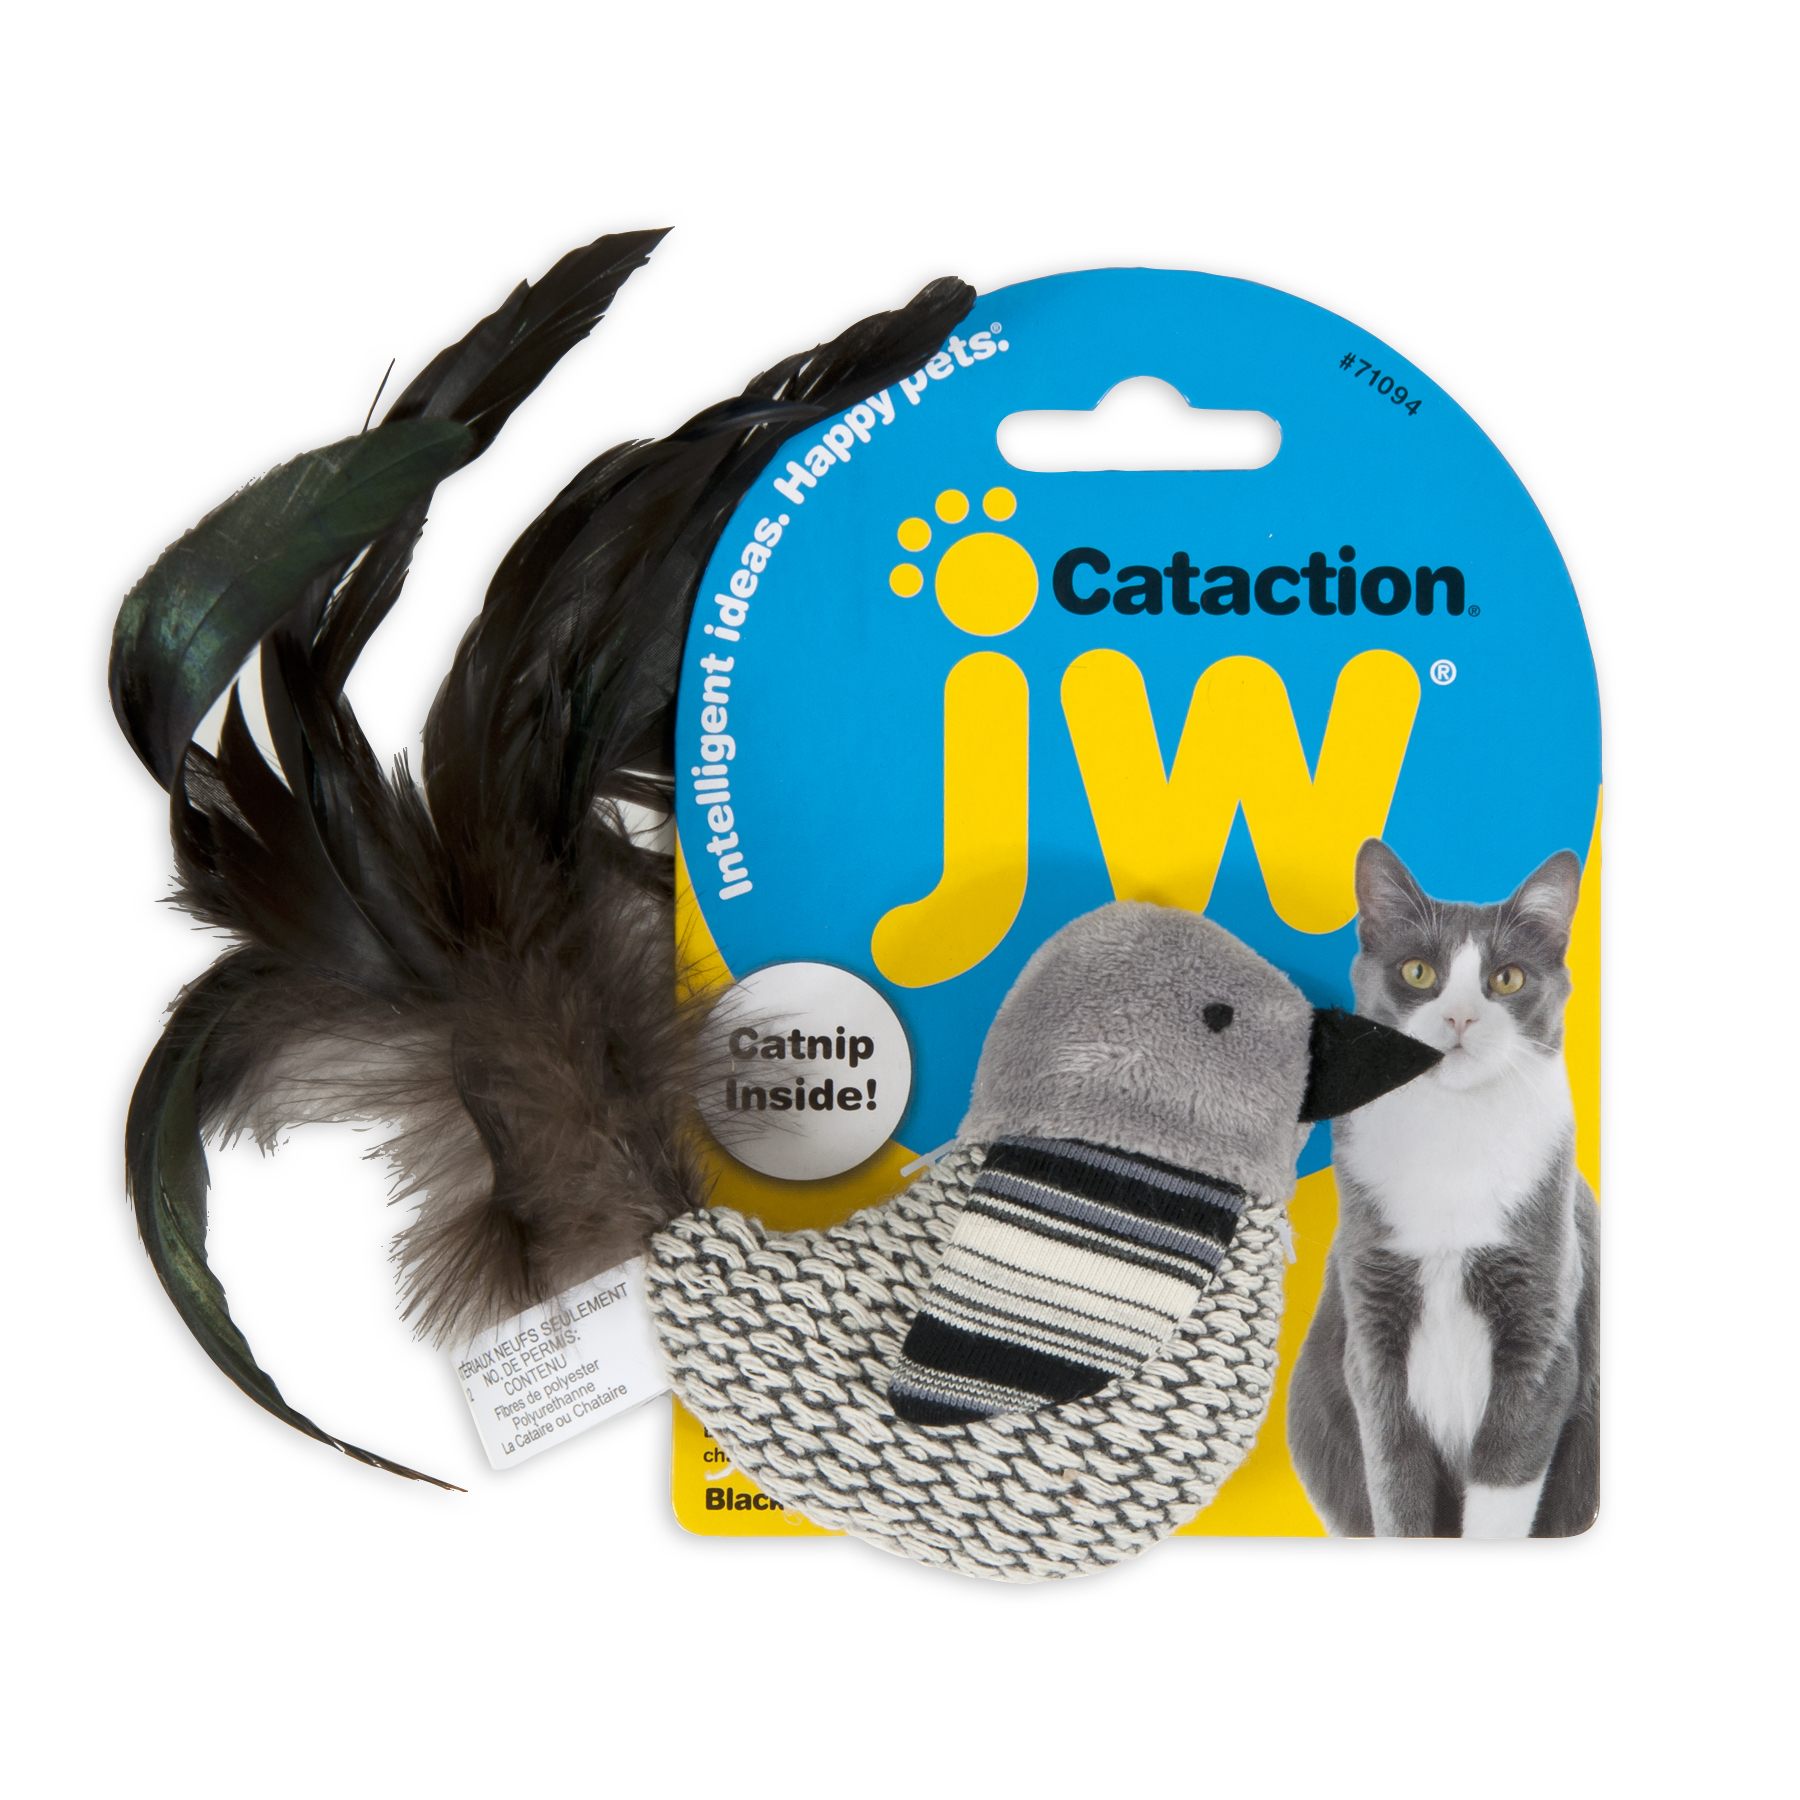 JW Cataction Black And White Toy